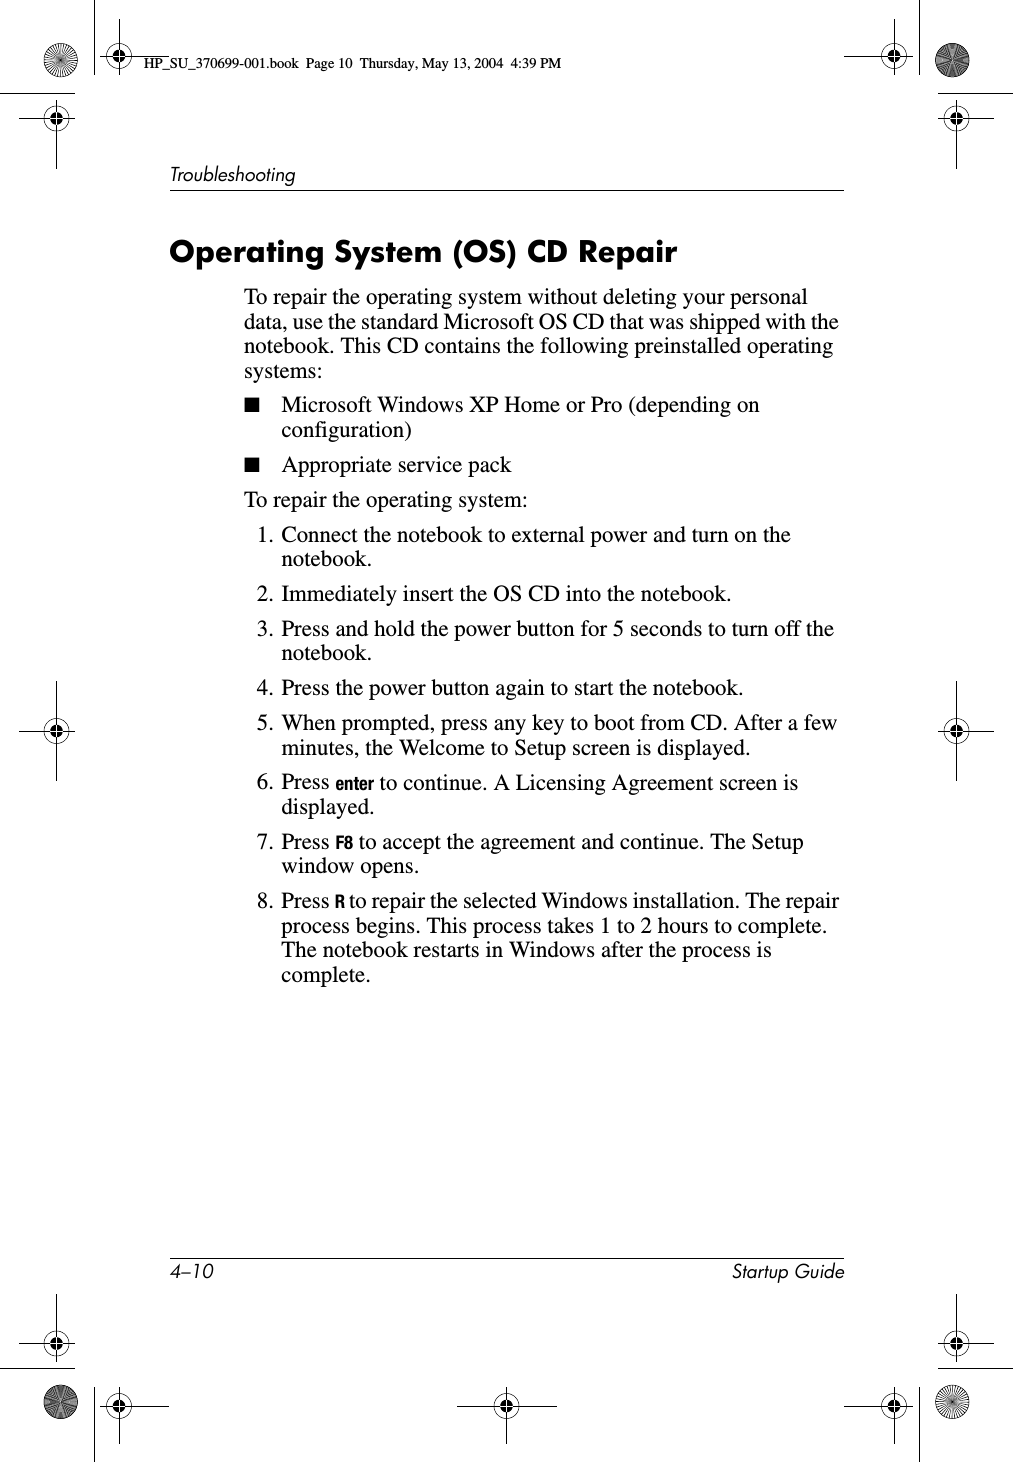 4–10 Startup GuideTroubleshootingOperating System (OS) CD RepairTo repair the operating system without deleting your personal data, use the standard Microsoft OS CD that was shipped with the notebook. This CD contains the following preinstalled operating systems:■Microsoft Windows XP Home or Pro (depending on configuration)■Appropriate service packTo repair the operating system:1. Connect the notebook to external power and turn on the notebook.2. Immediately insert the OS CD into the notebook.3. Press and hold the power button for 5 seconds to turn off the notebook.4. Press the power button again to start the notebook.5. When prompted, press any key to boot from CD. After a few minutes, the Welcome to Setup screen is displayed.6. Press enter to continue. A Licensing Agreement screen is displayed.7. Press F8 to accept the agreement and continue. The Setup window opens.8. Press R to repair the selected Windows installation. The repair process begins. This process takes 1 to 2 hours to complete. The notebook restarts in Windows after the process is complete.HP_SU_370699-001.book  Page 10  Thursday, May 13, 2004  4:39 PM